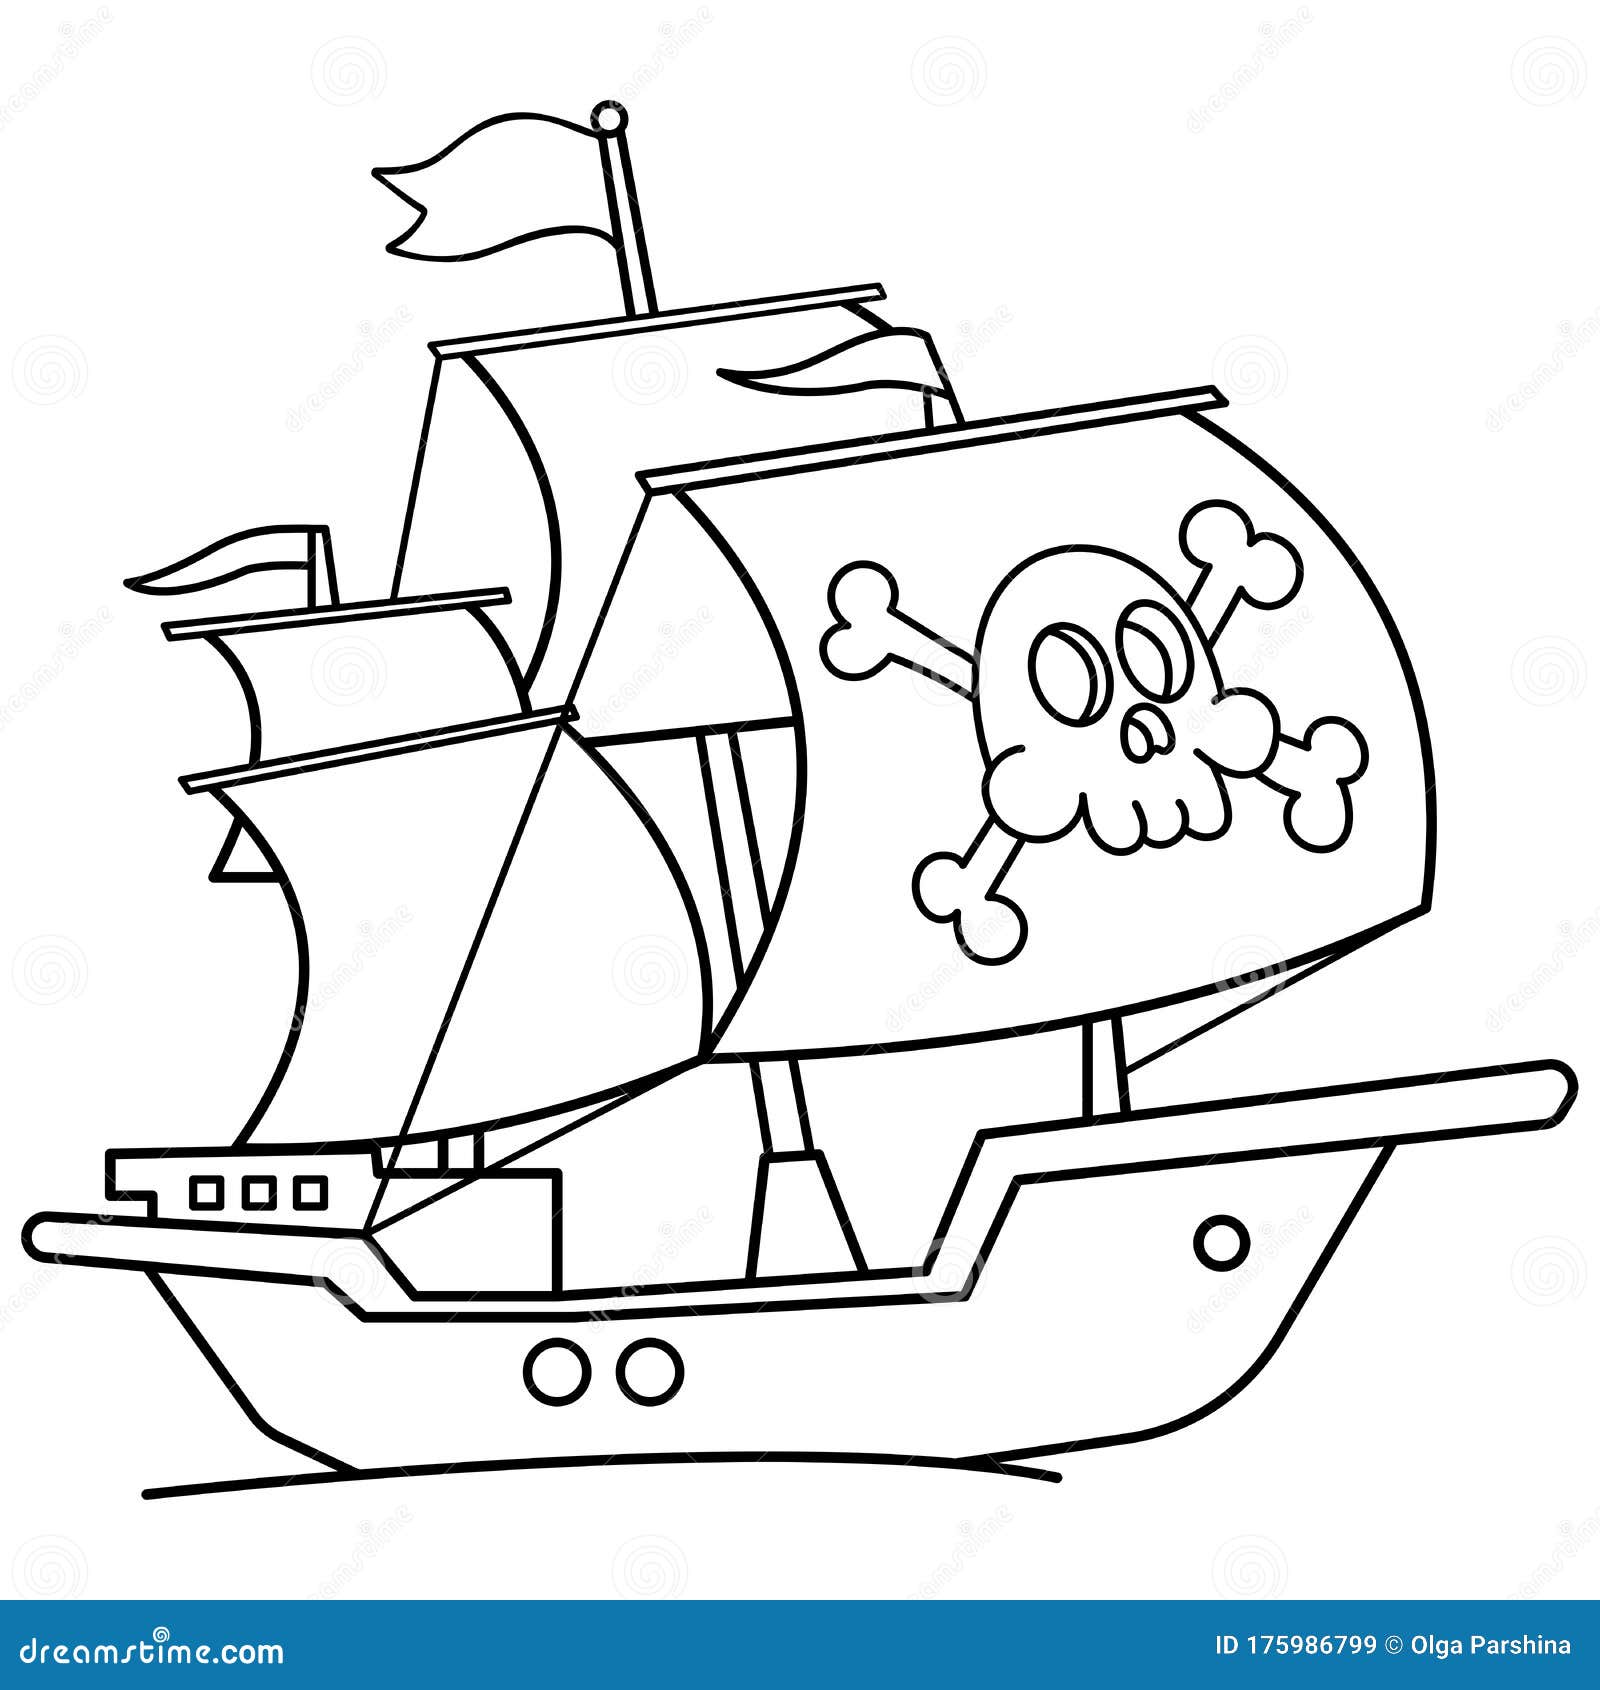 Coloring page outline of cartoon pirate ship sailboat with black sails with skull in sea drawing stock vector